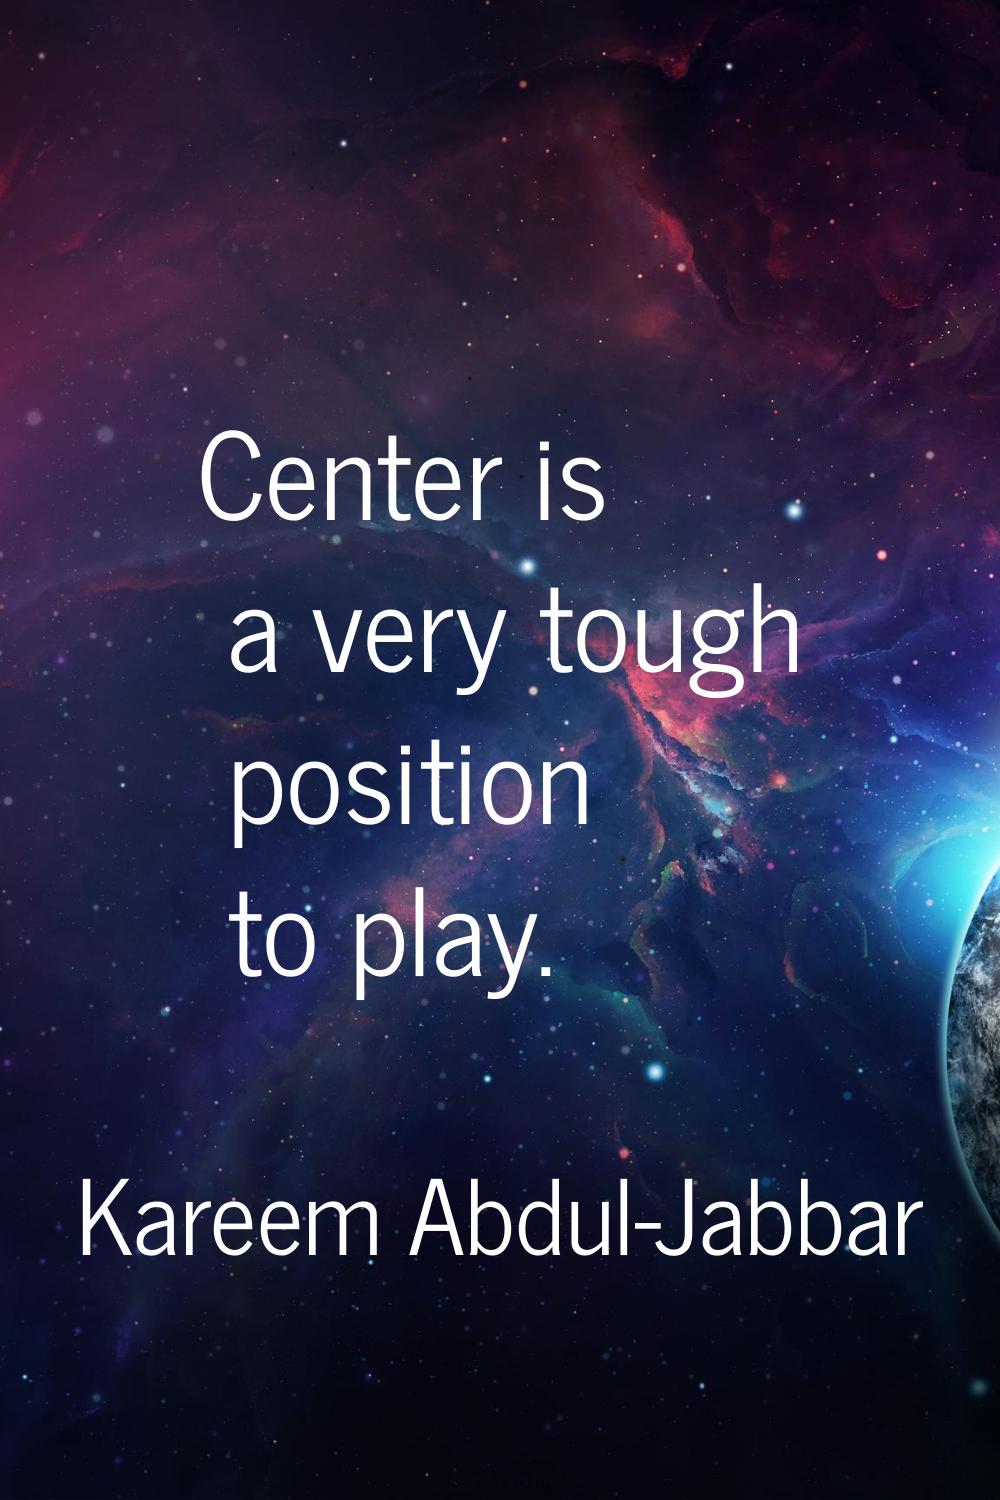 Center is a very tough position to play.